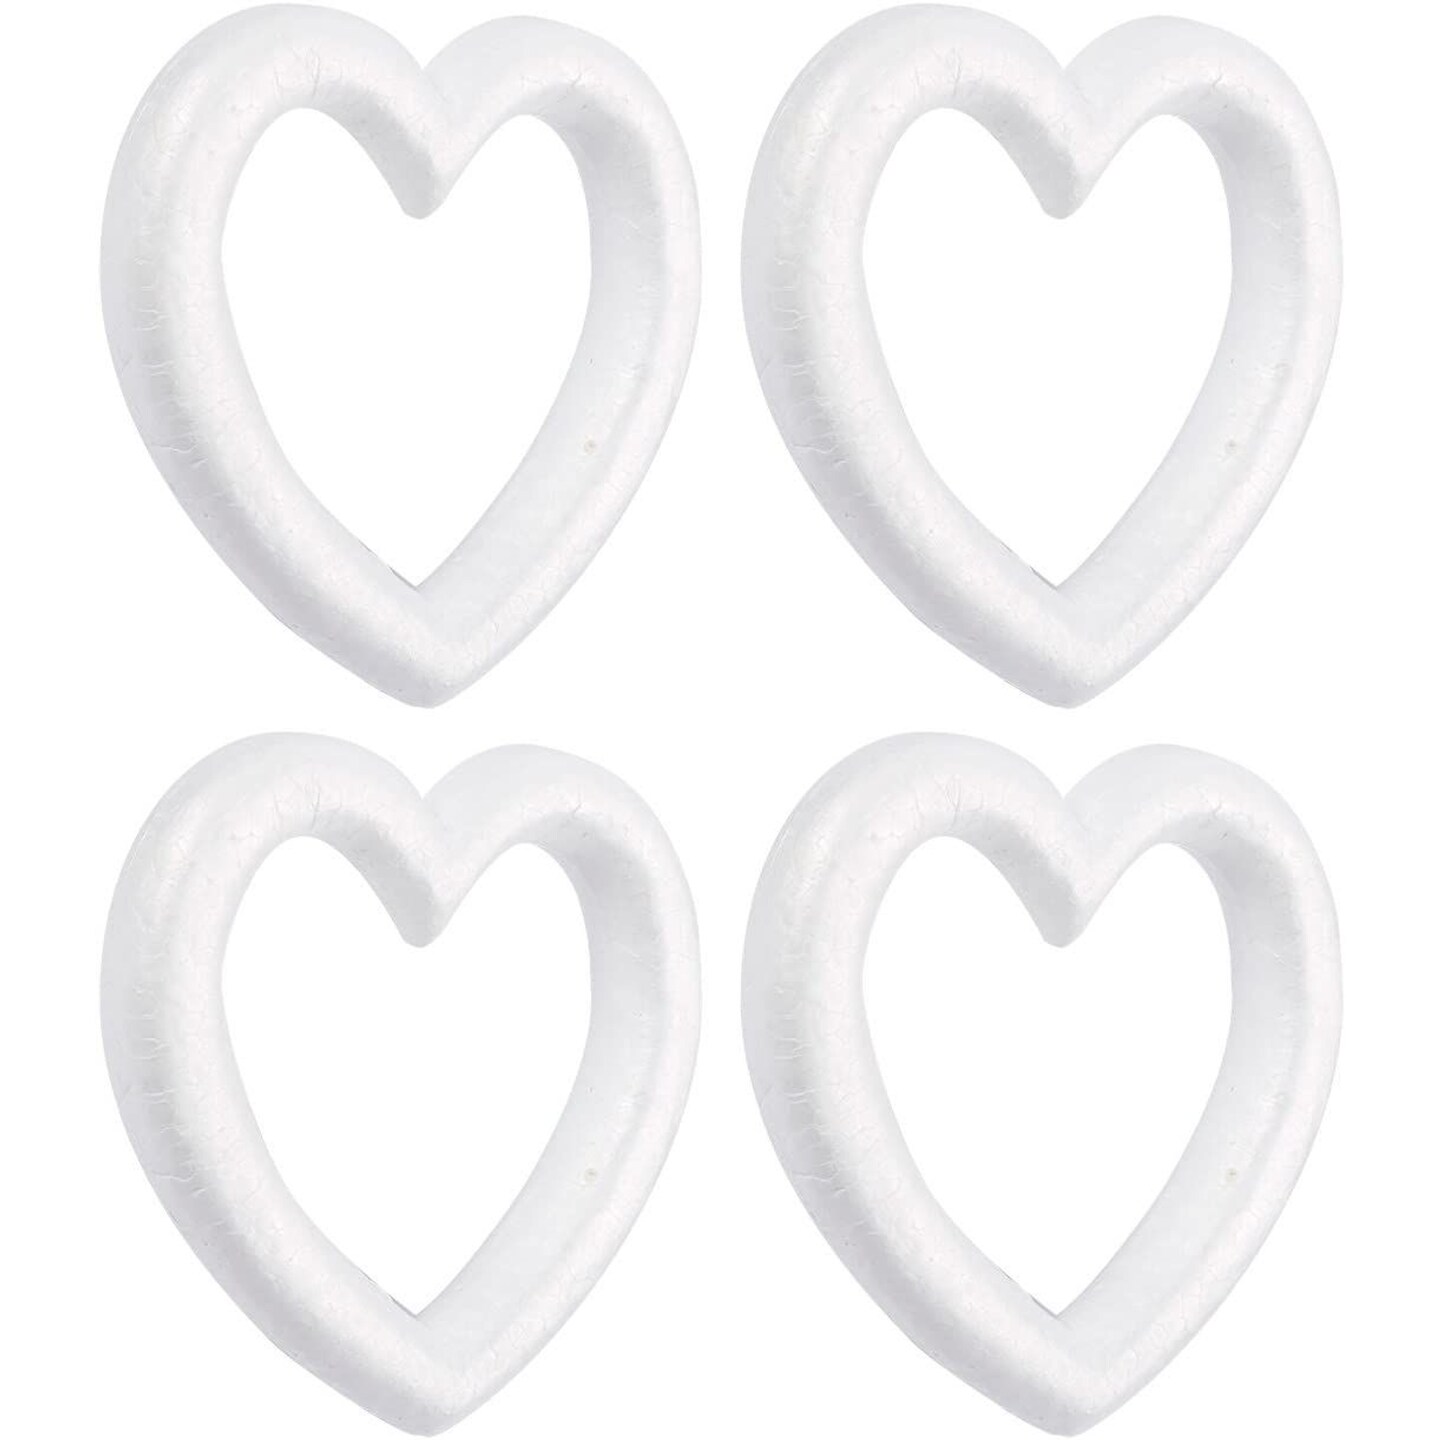 White Foam Heart Wreath Forms for Crafts, DIY Hearts for Wedding,  Valentine's Decorations (10 In, 4 Pack)